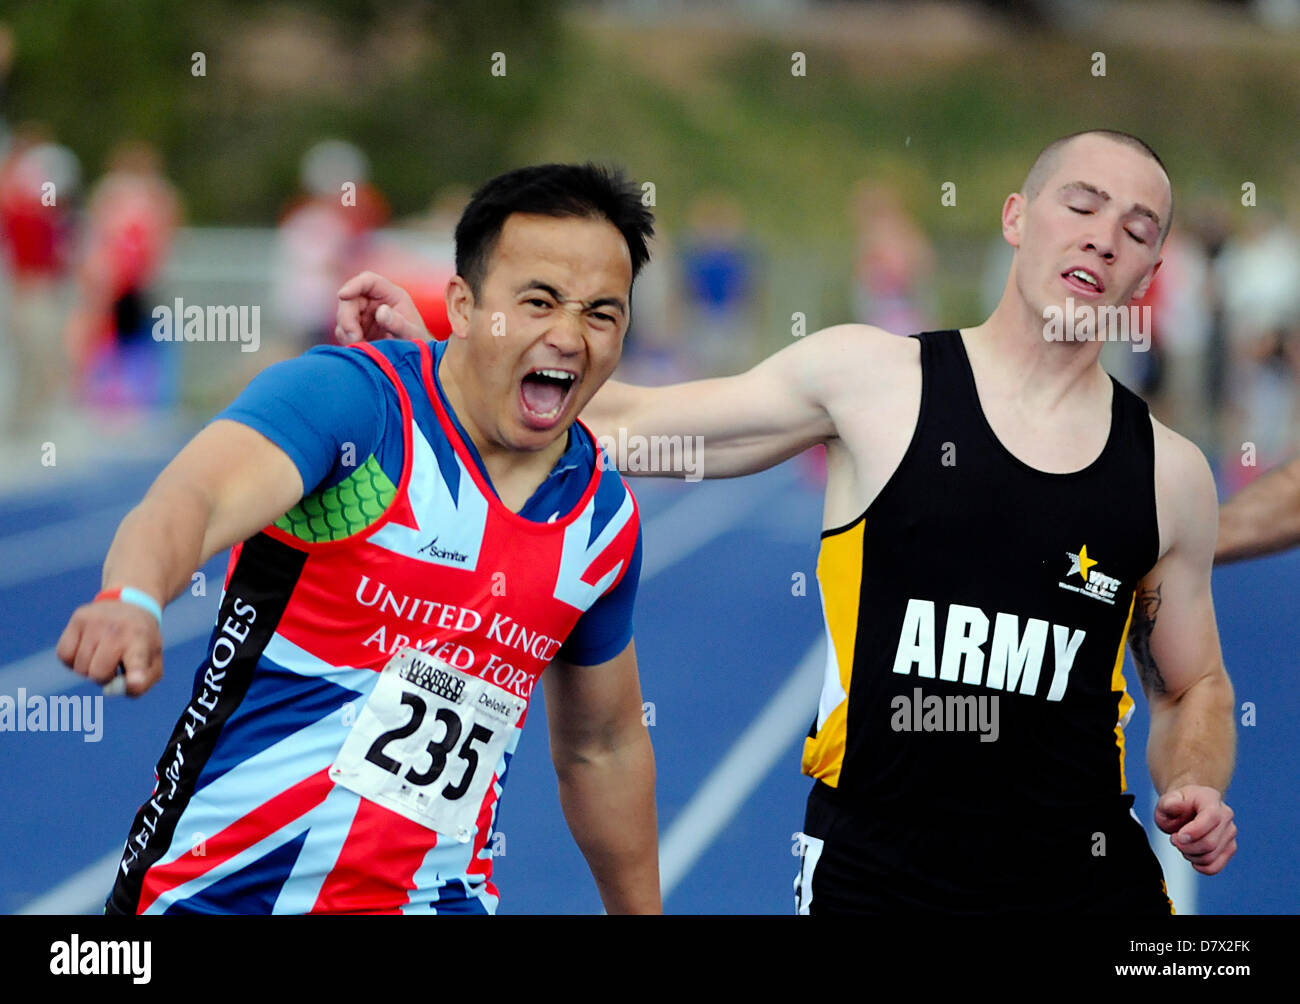 Colorado Springs, USA. 14th May 2013. British Armed Forces wounded warrior, Kushal Limbu, celebrates his victory in the men's 100 meters during Warrior Games track & field events at the United States Air Force Academy, Colorado Springs, Colorado. Over 260 injured and disabled service men and women have gathered in Colorado Springs to compete in seven sports, May 11-16. All branches of the military are represented, including Special Operations and members of the British Armed Forces. Credit:  Cal Sport Media / Alamy Live News Stock Photo